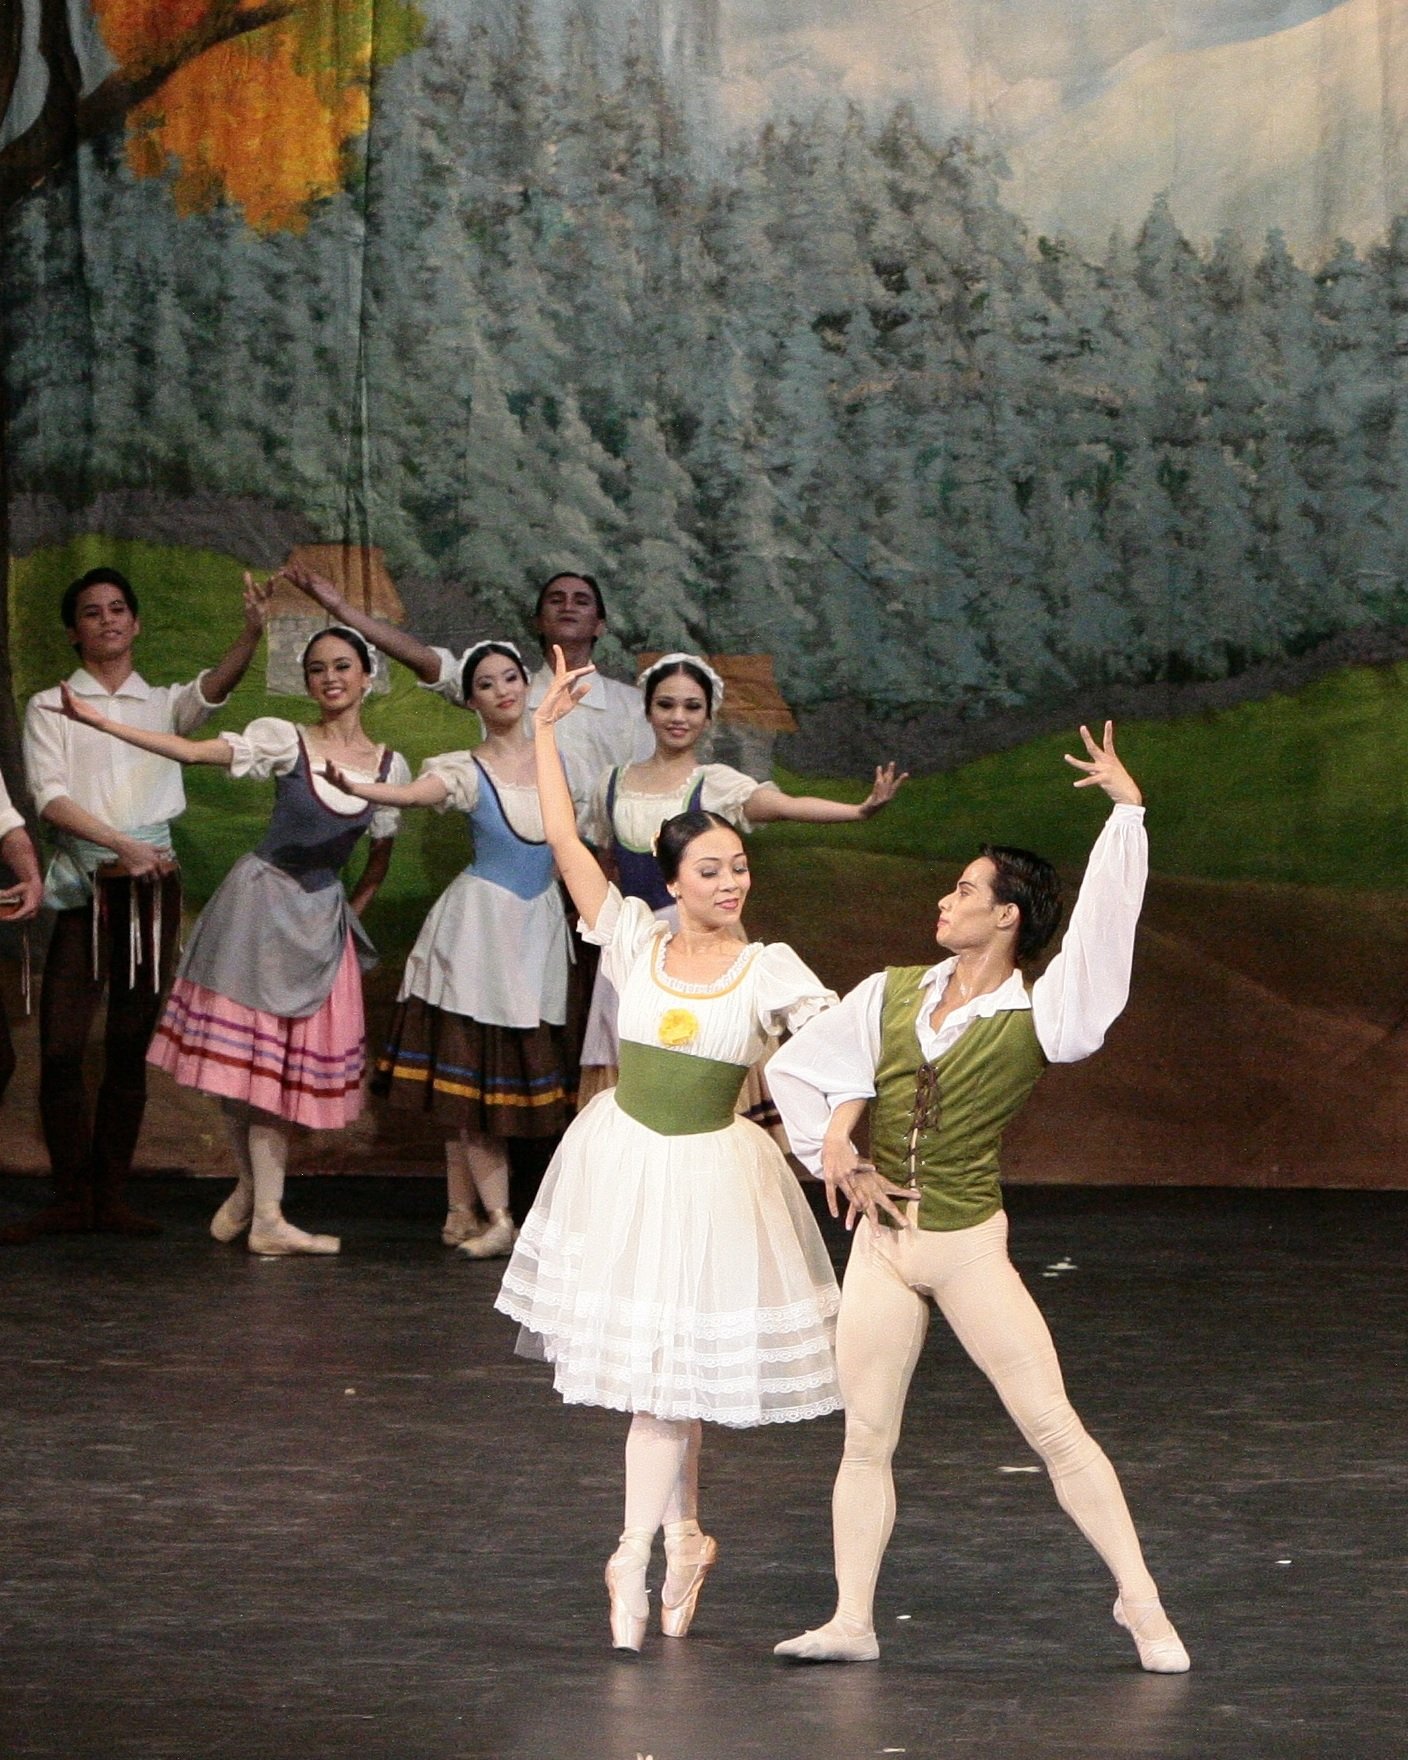    Dancing the Peasant Pas de Deux in  Giselle  (2010), Mylene Aggabao and Alvin Santos are in complete harmony as they also don costumes with complementing touches of olive green – in the thick waistband of her tutu and in his vest.   